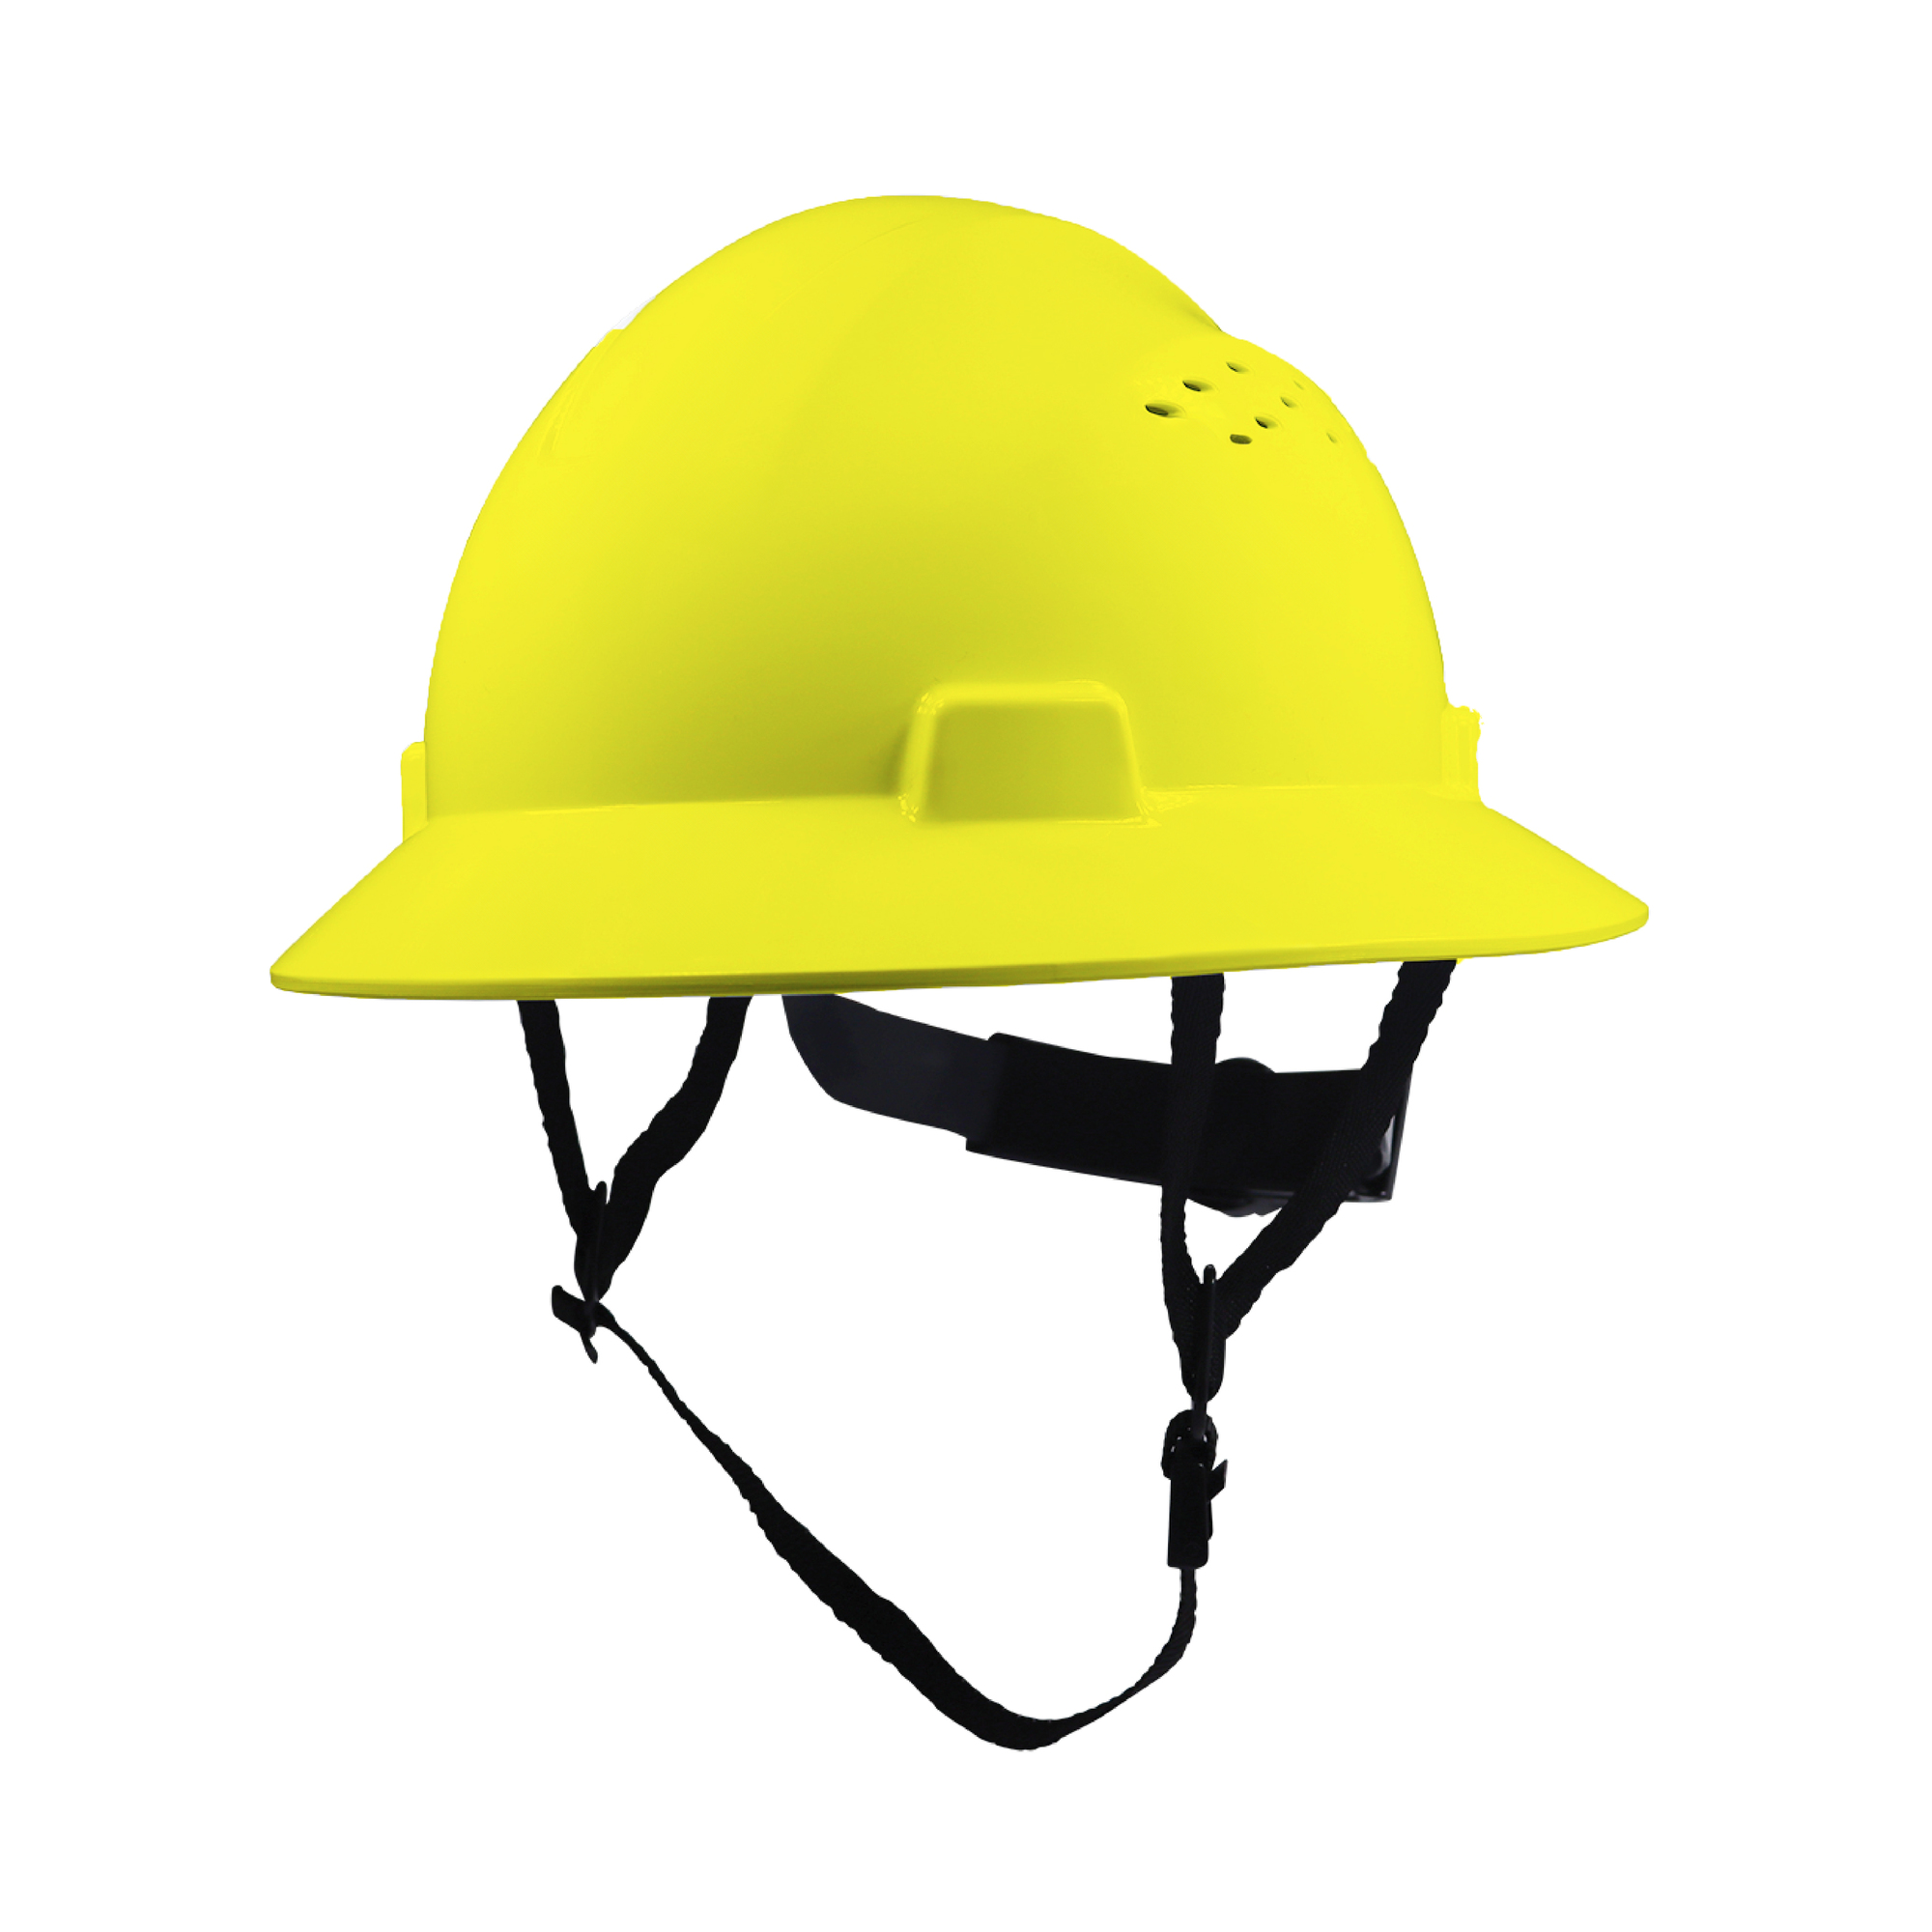 General Electric, YELLOW FULL BRIM HARD HAT VENTED, Size One Size, Color Yellow, Hat Style Full Brim, Model GH328Y